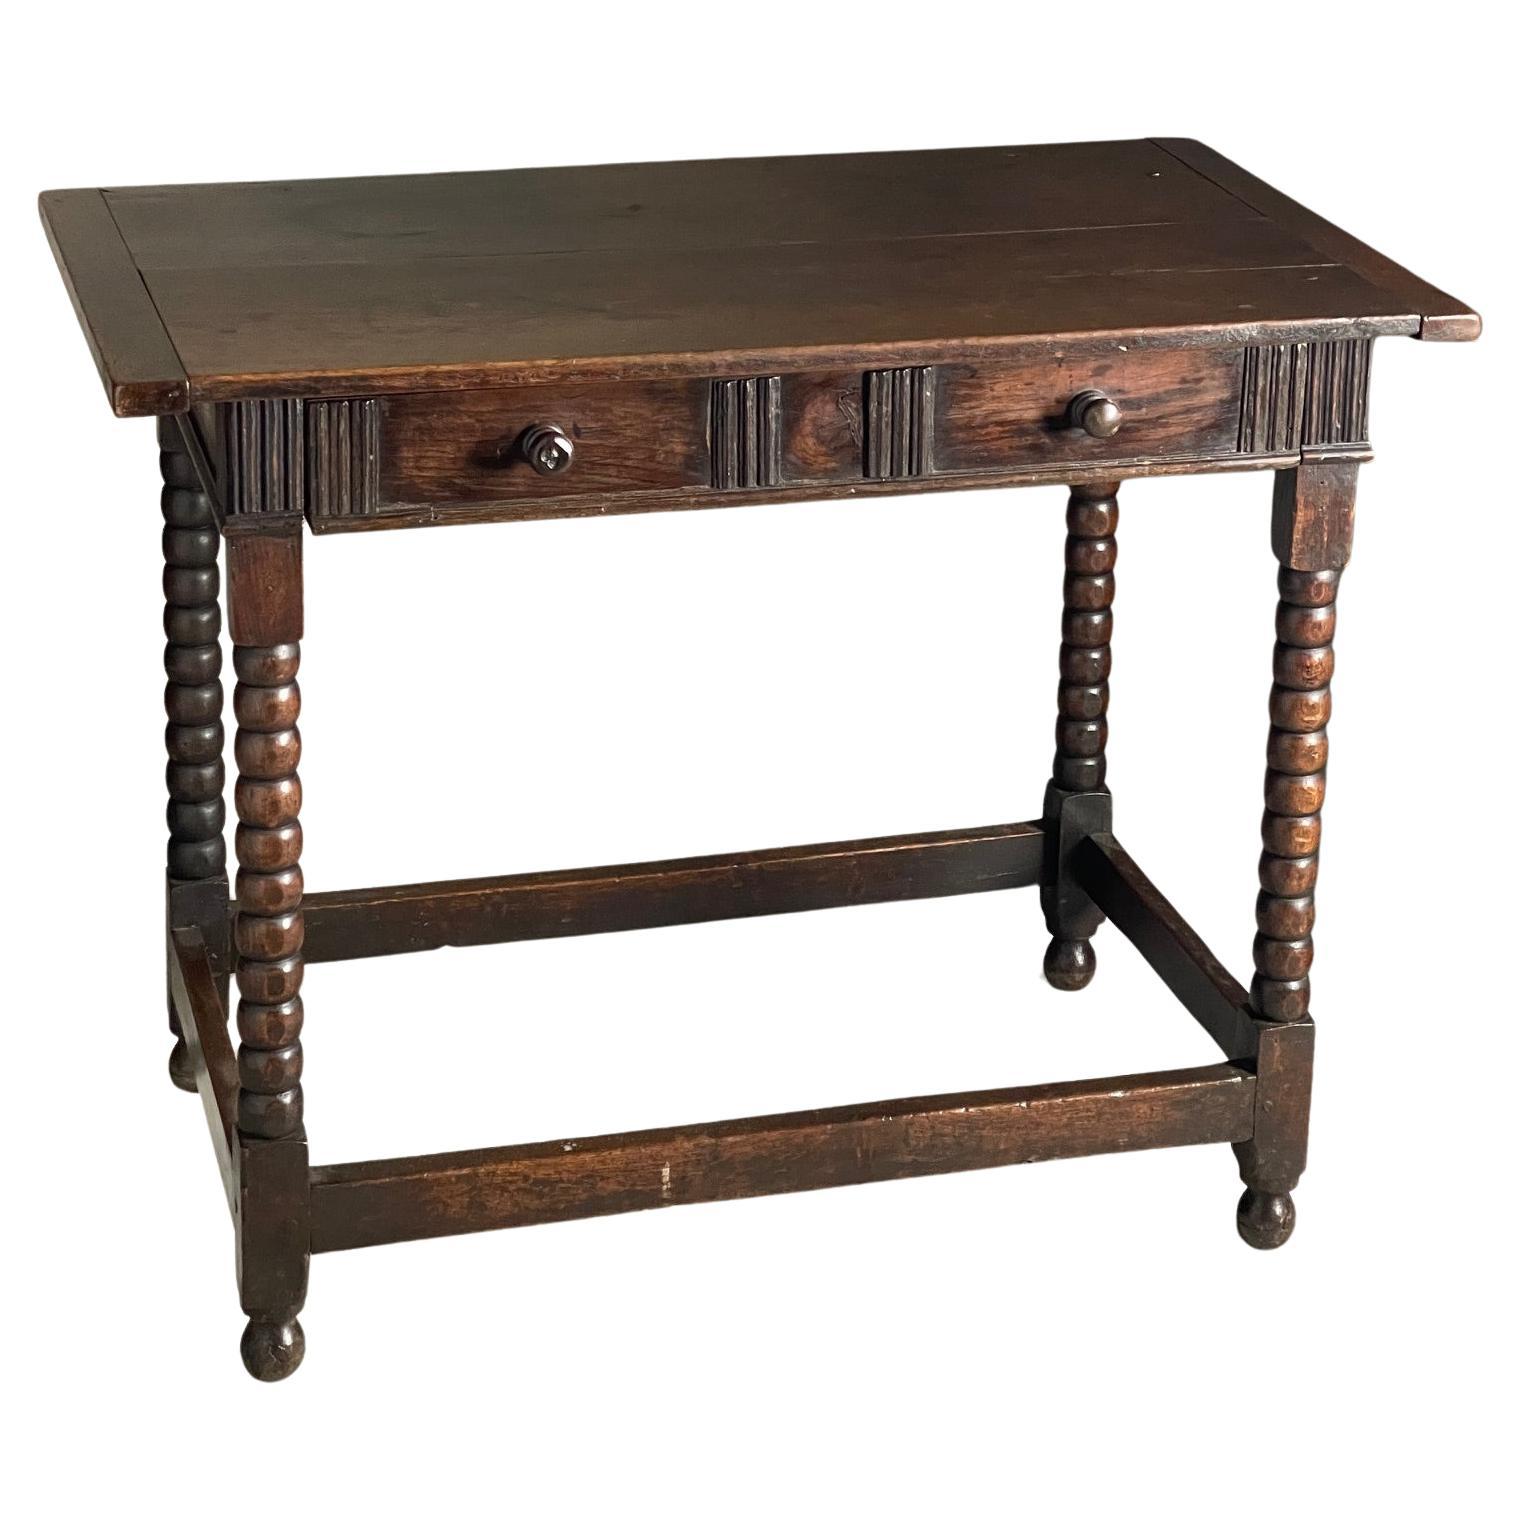 Late 17th Century Oak Side Table with Drawer